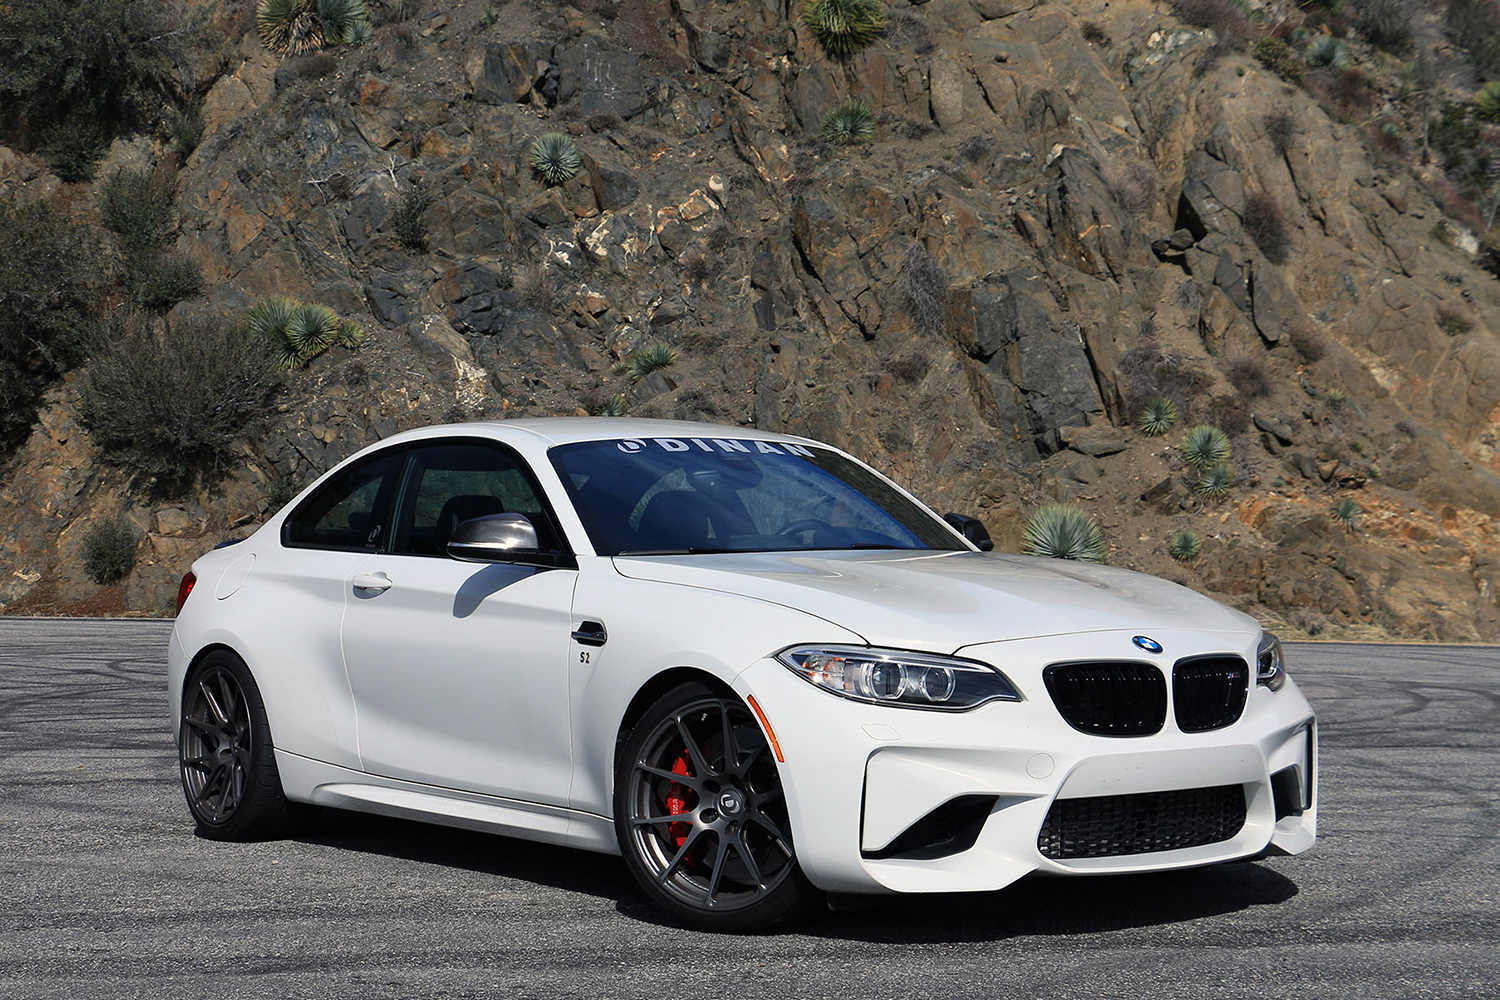 bmw tuner dinan gives the m2 a performance focused makeover we go for spin img 5505